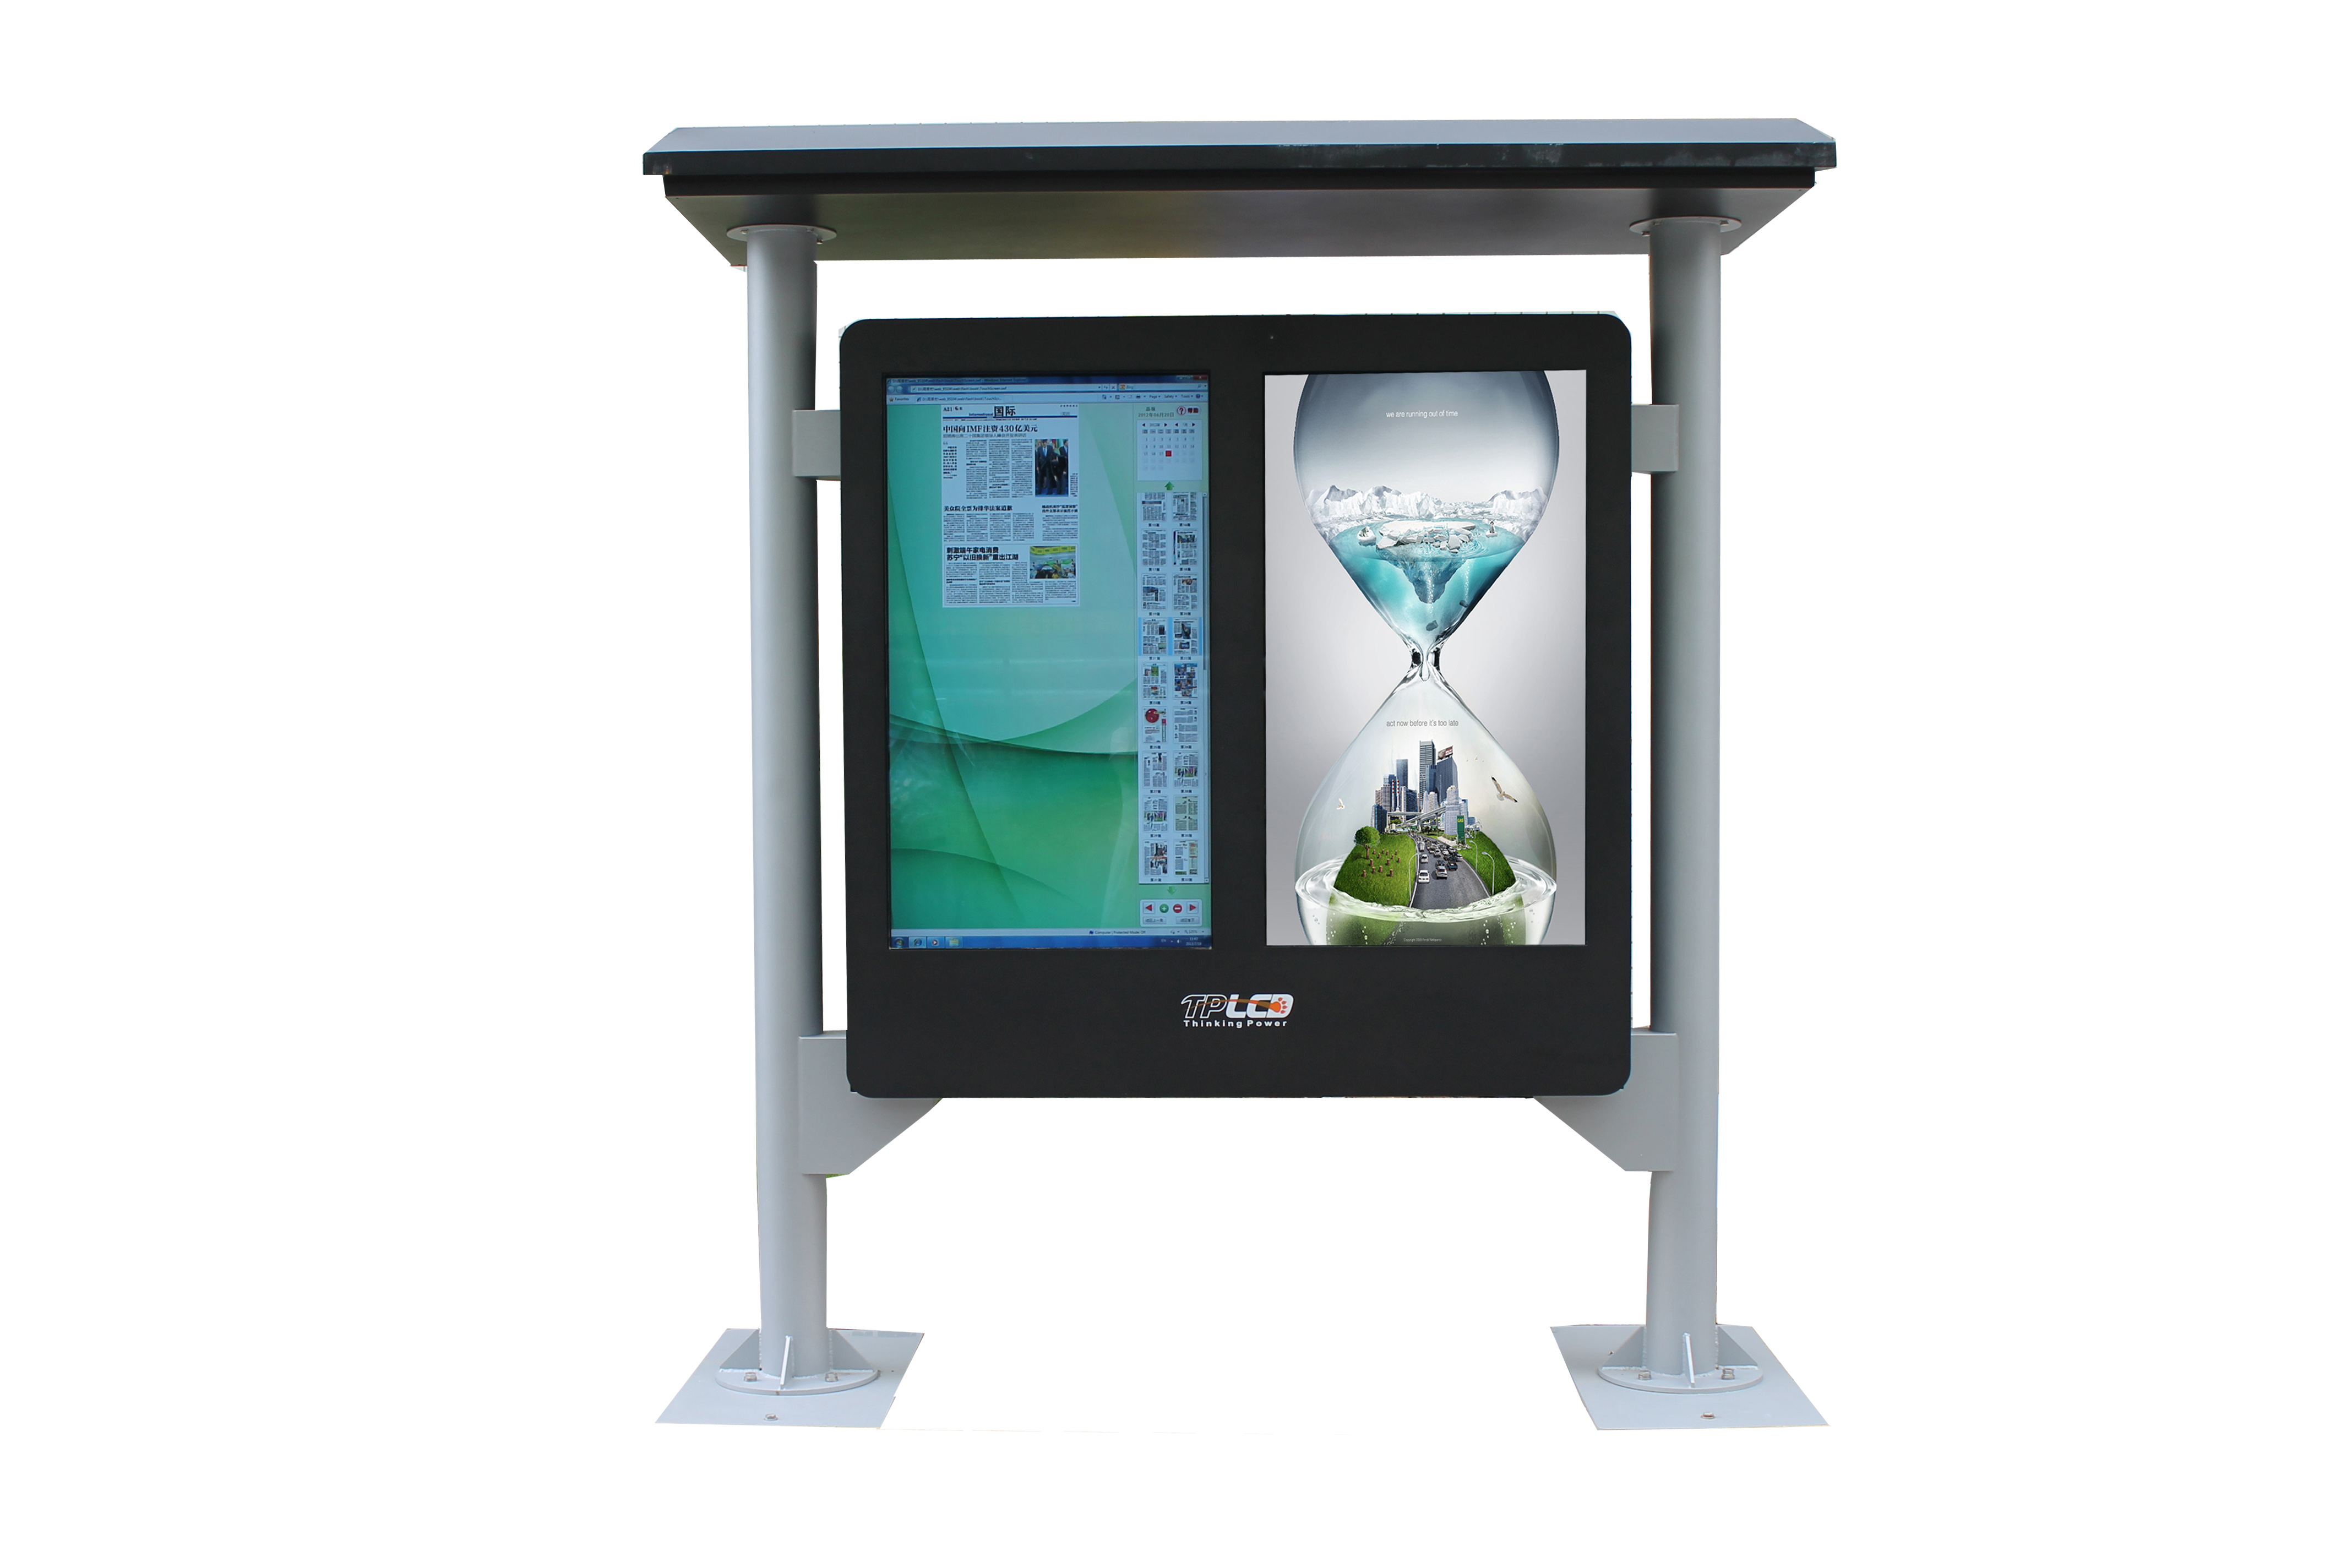 The future of outdoor LCD display